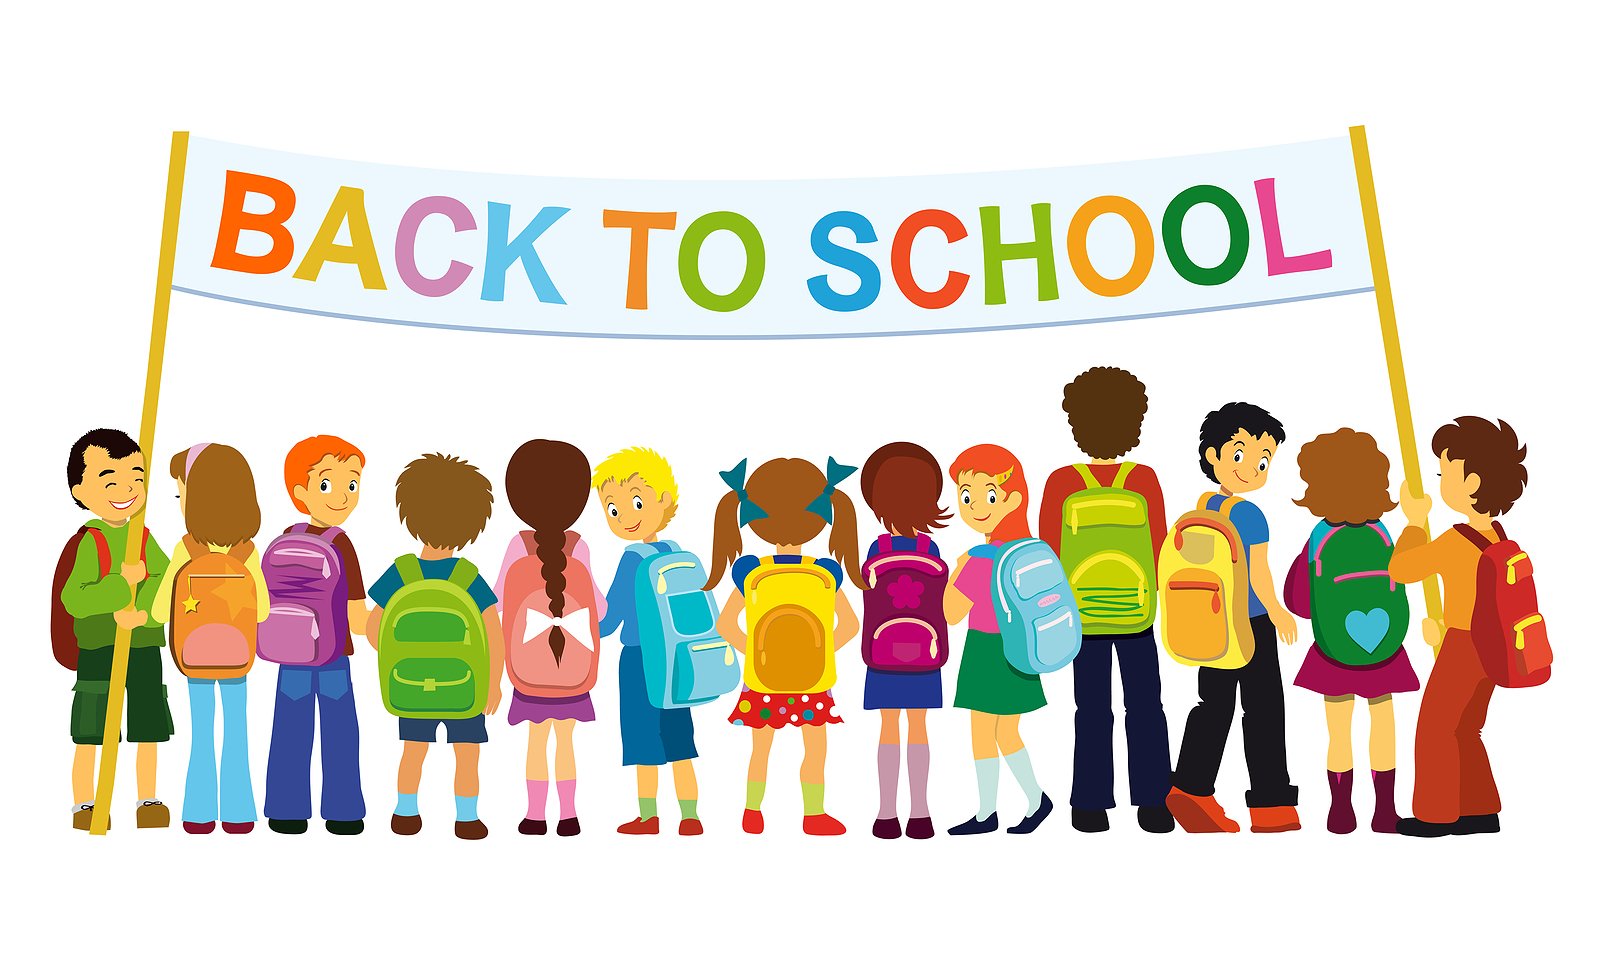 Welcome back to school clip art cliparts and others inspiration